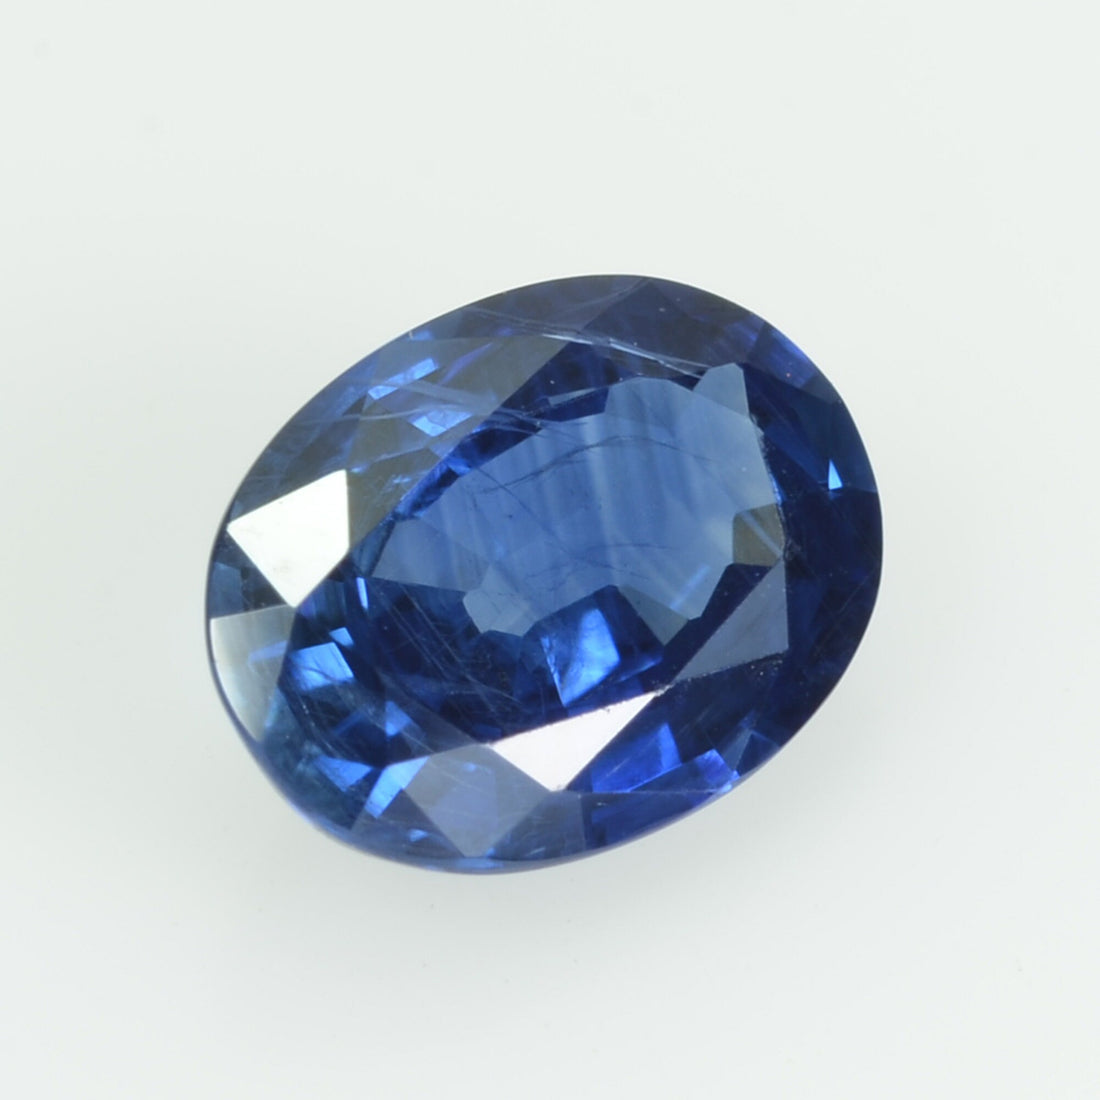 0.92 cts natural blue sapphire loose gemstone oval cut AGL Certified